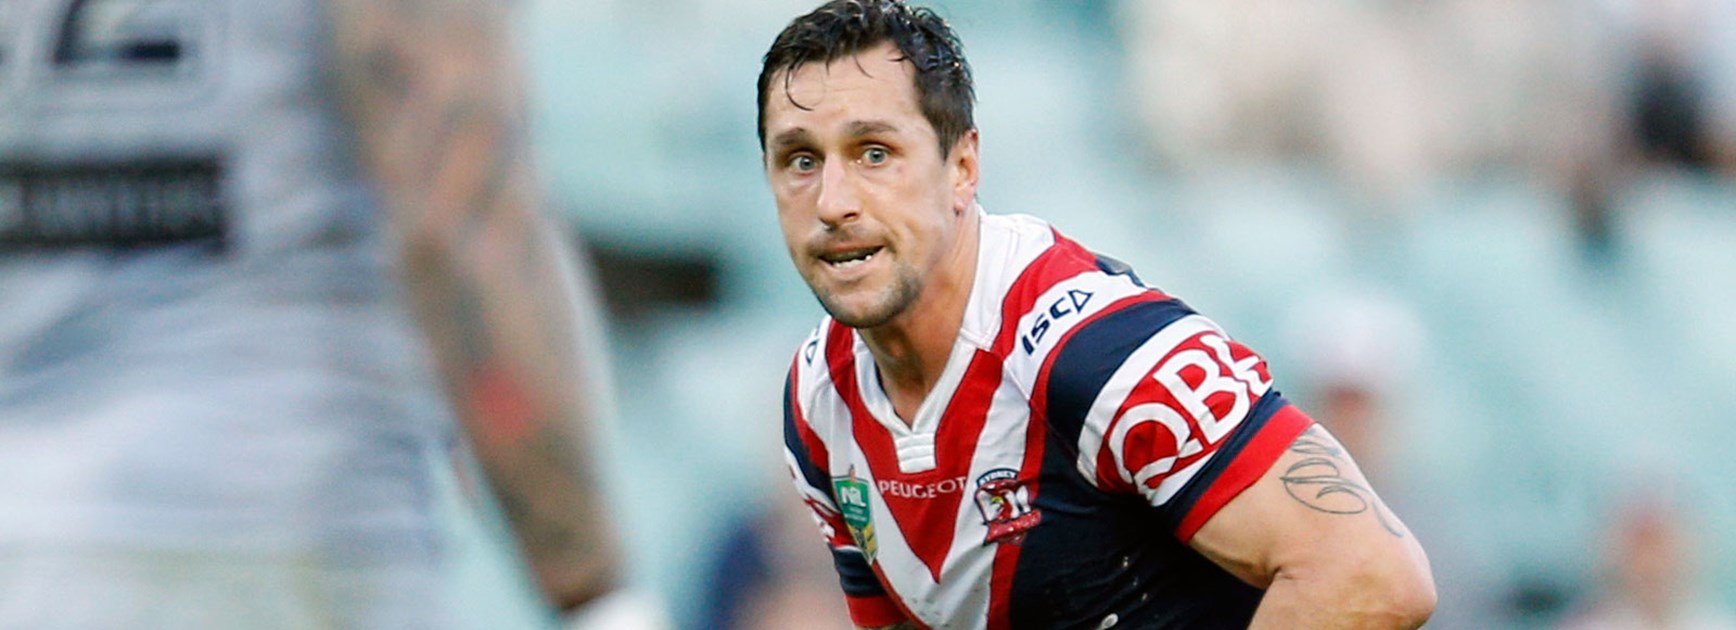 Roosters halfback Mitchell Pearce against the Cowboys in Round 23.